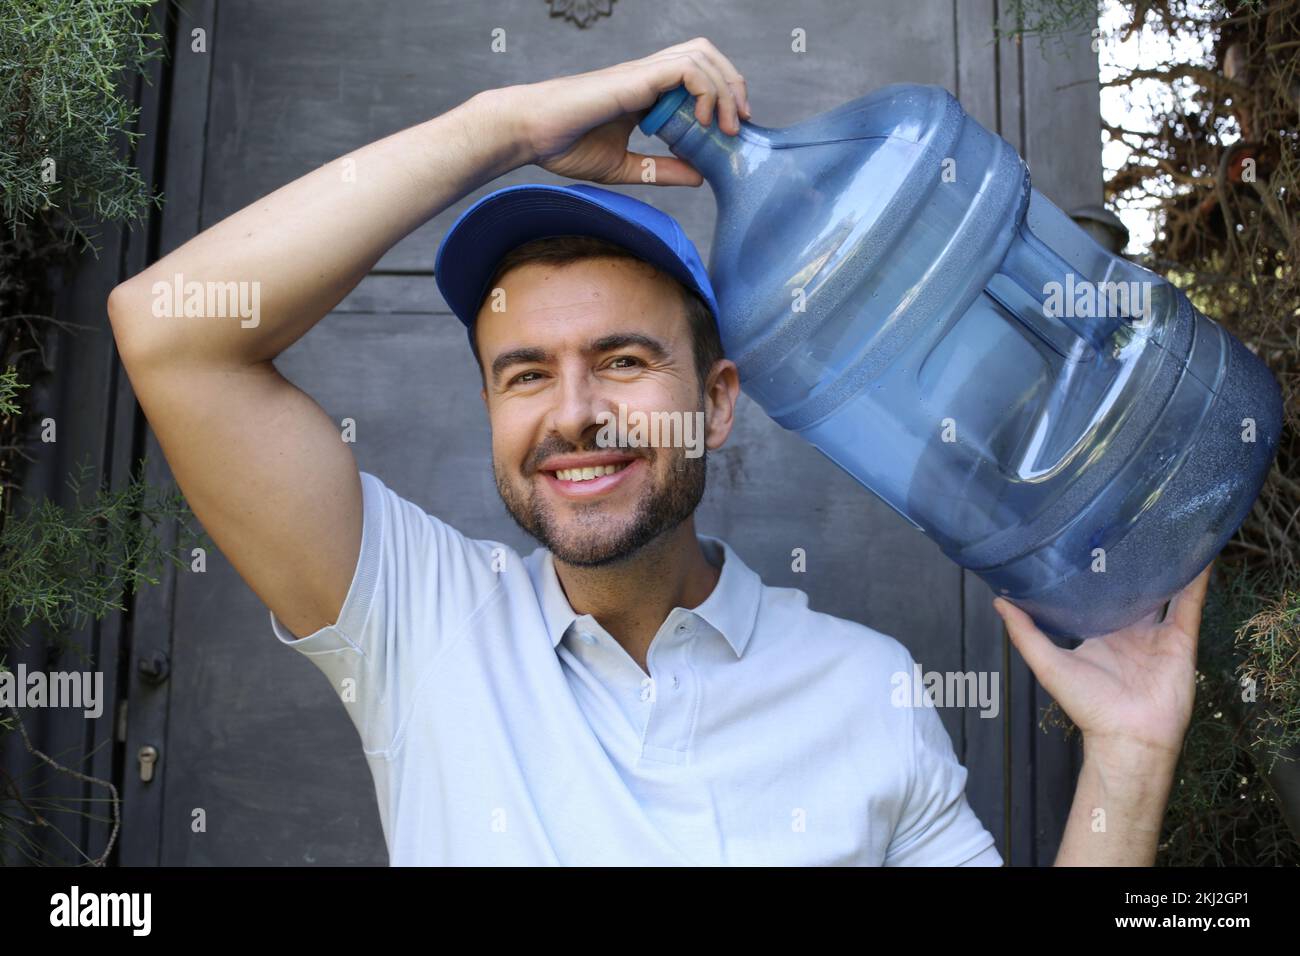 https://c8.alamy.com/comp/2KJ2GP1/water-delivery-guy-all-in-blue-outfit-2KJ2GP1.jpg